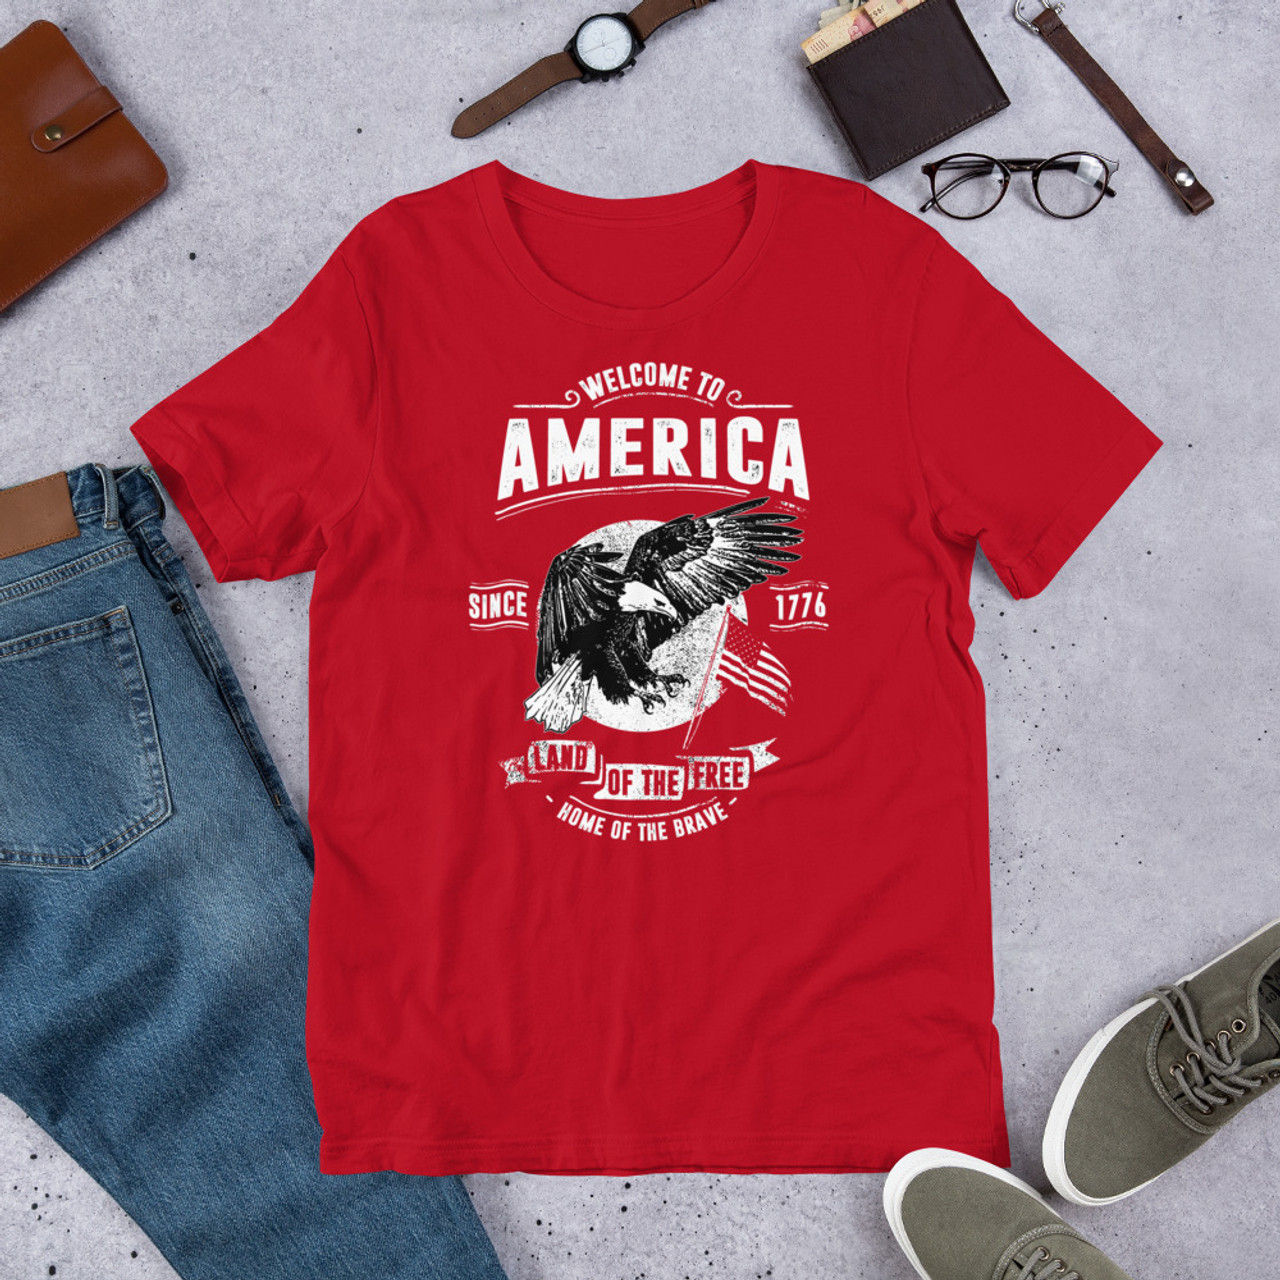 Red T-Shirt - Bella + Canvas 3001 Welcome to America